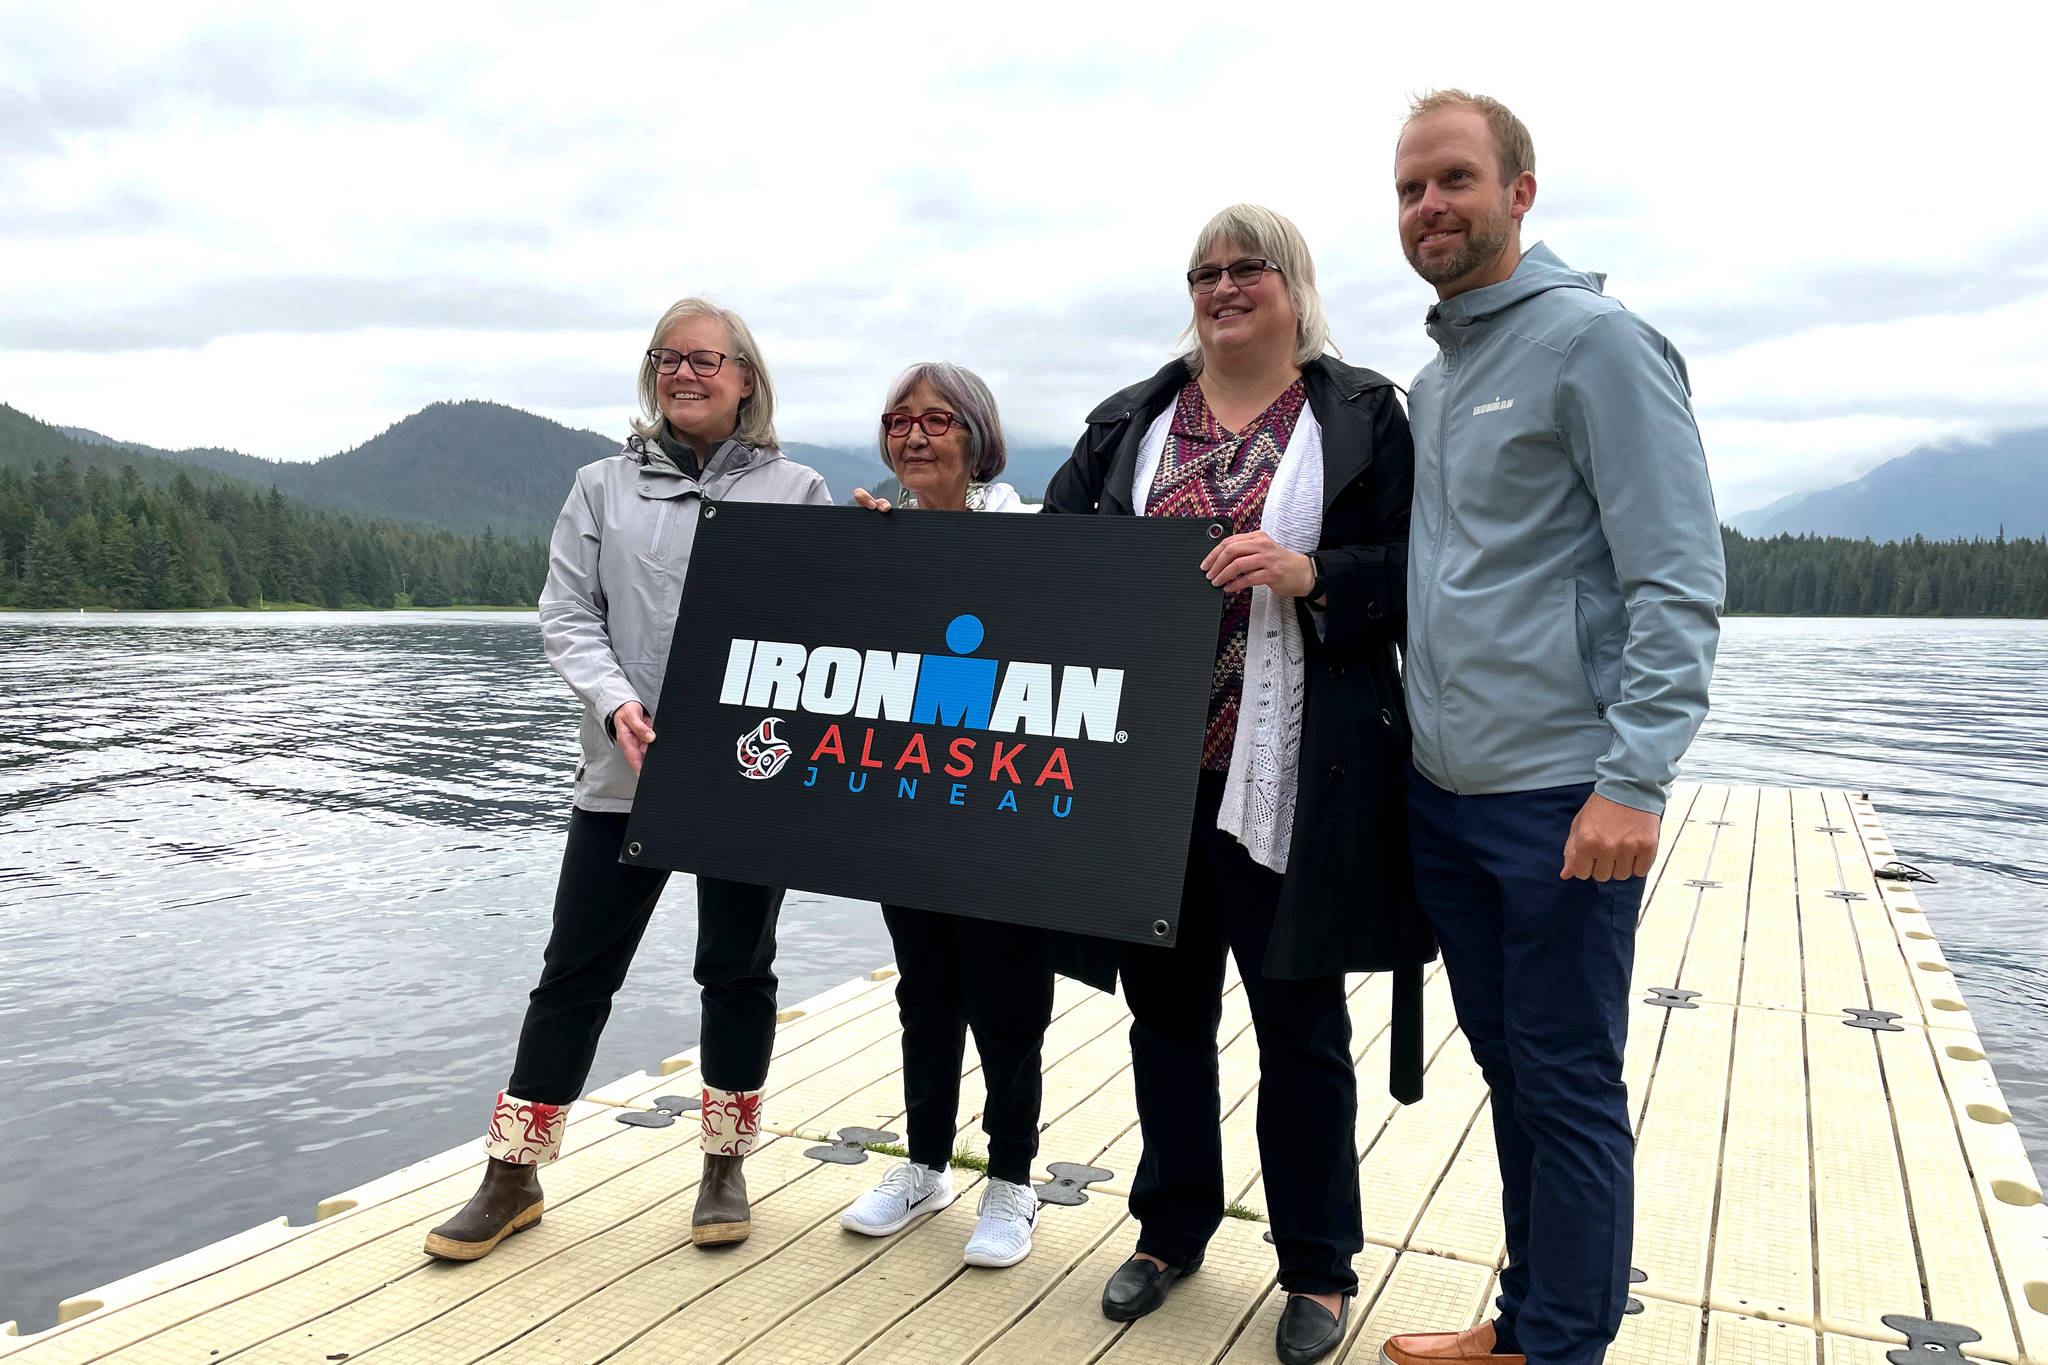 Travel Juneau CEO and President Liz Perry, Sealaska Heritage Institute President Rosita Worl, City and Borough of Juneau Mayor Beth Weldon and Ironman regional director Dave Christen hold a sign for the 2022 Juneau Ironman event as they announce the race’s Alaska debut on the University of Alaska- Southeast campus on Aug. 9, 2021. (Michael S. Lockett / Juneau Empire)